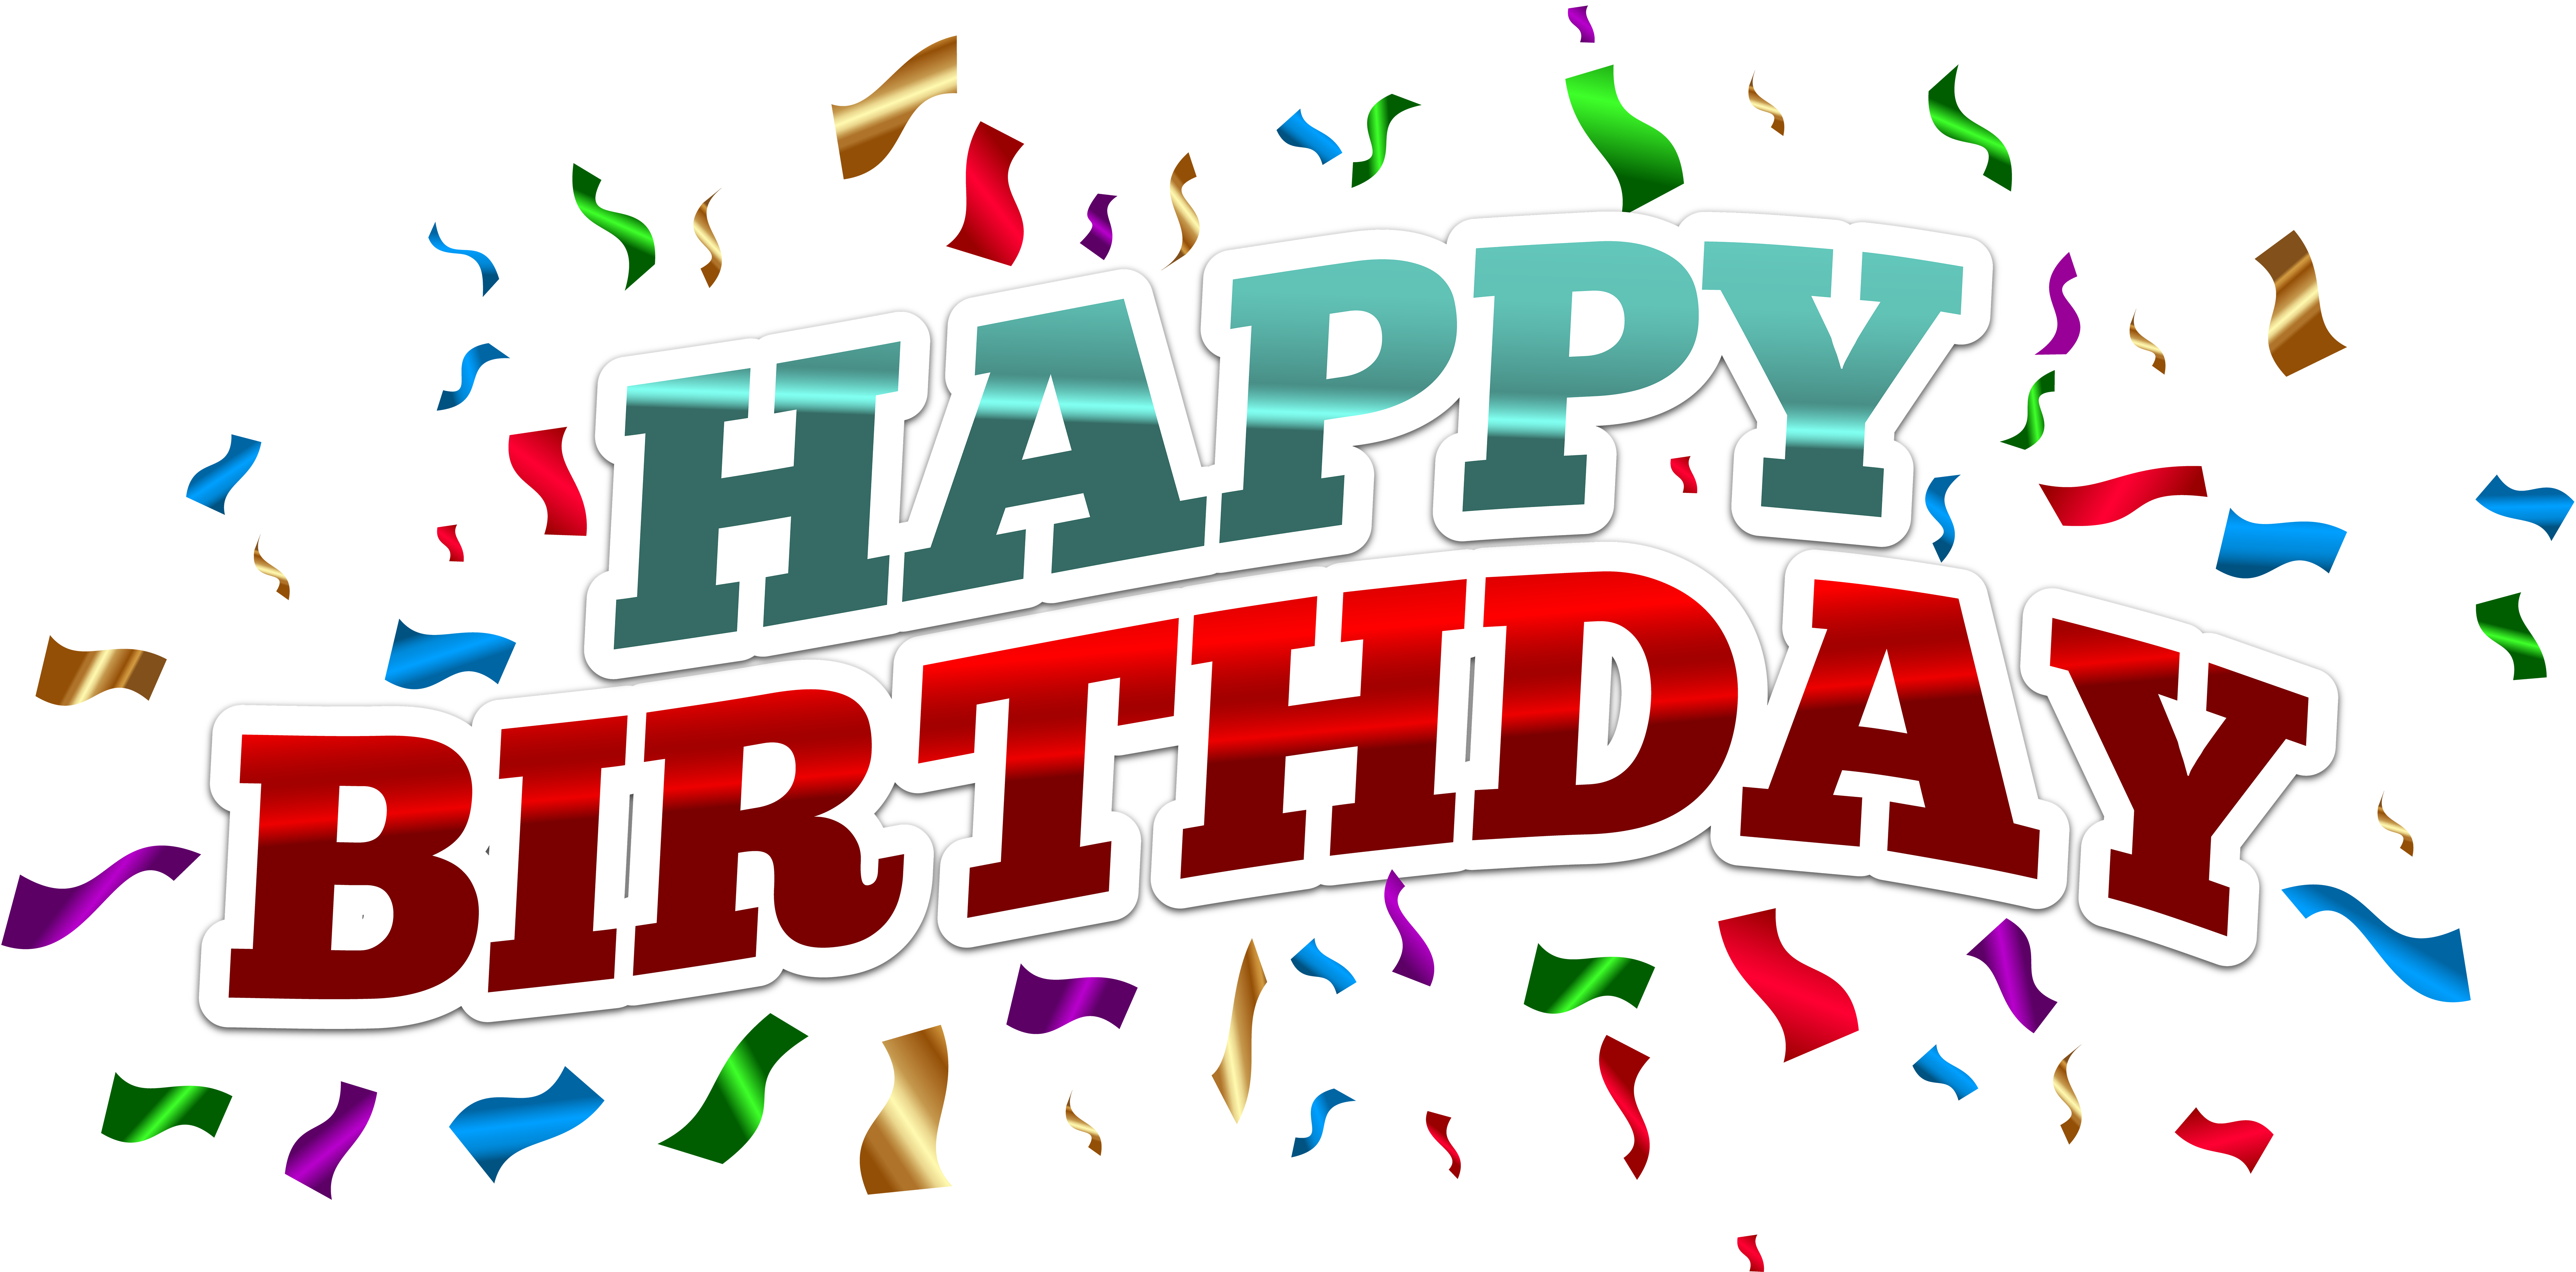 Happy birthday png images. Colorful clip art image